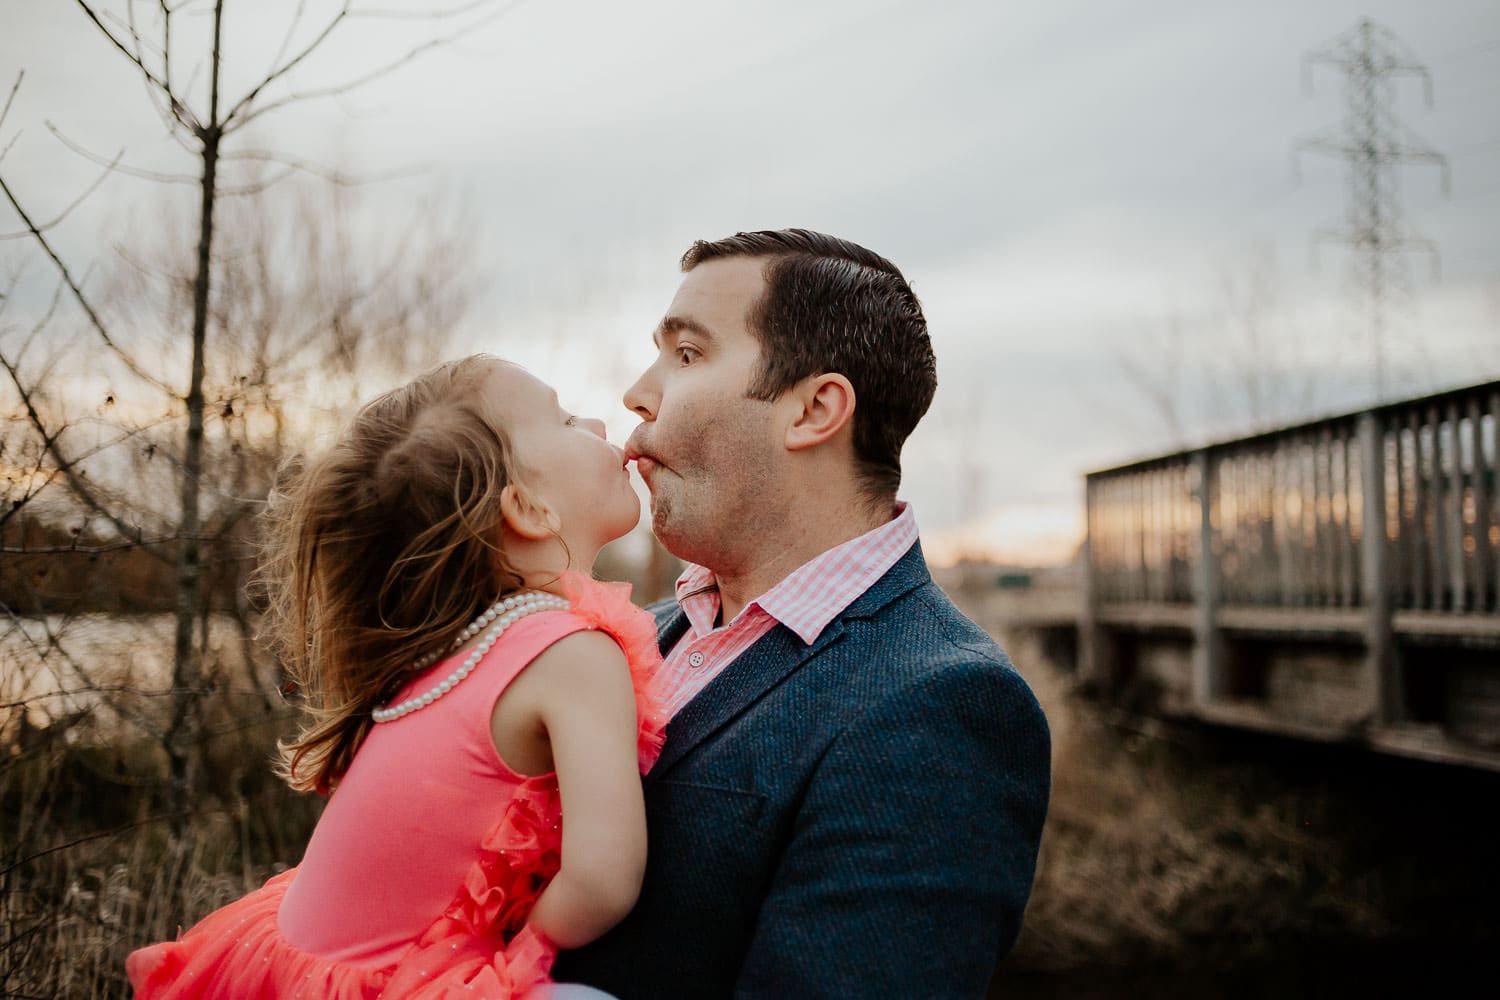 Dad and daughter being silly together making funny faces - outdoor photography